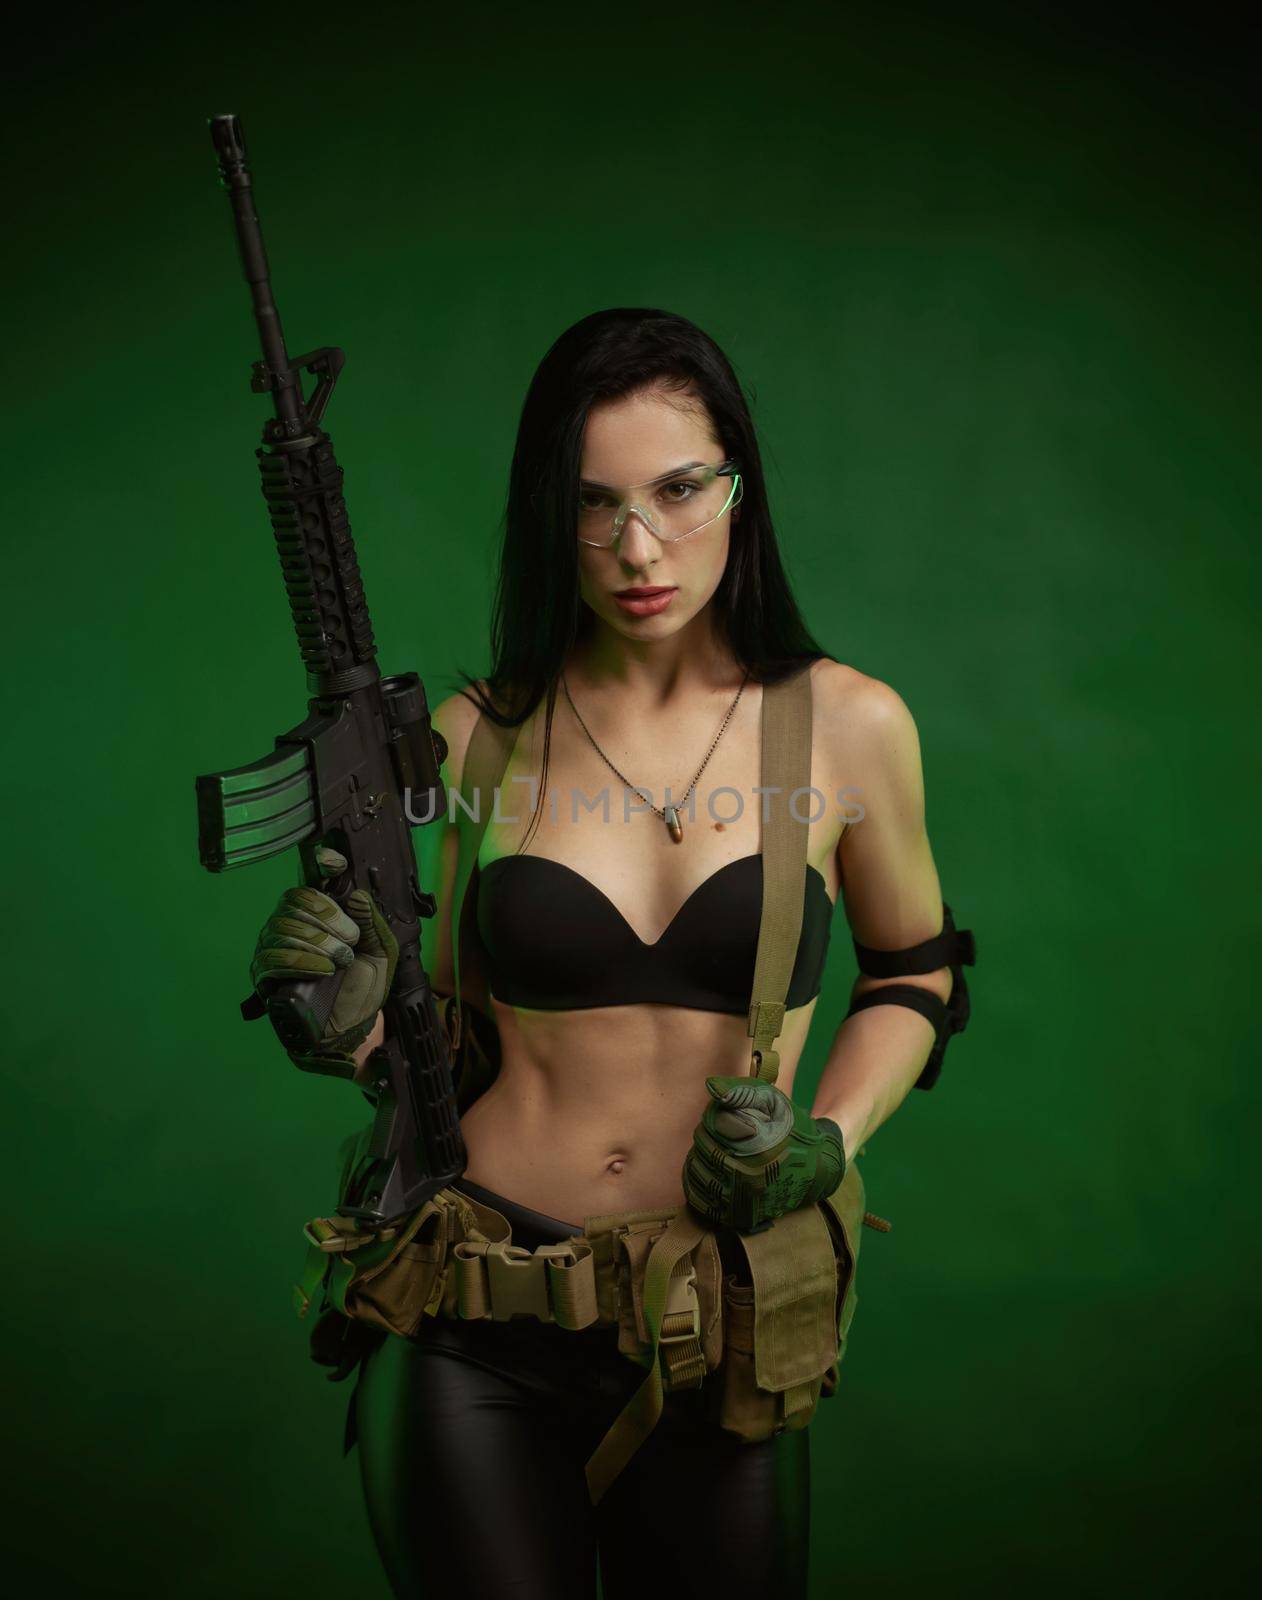 the slender woman in military fatigues with an American automatic rifle on a green background